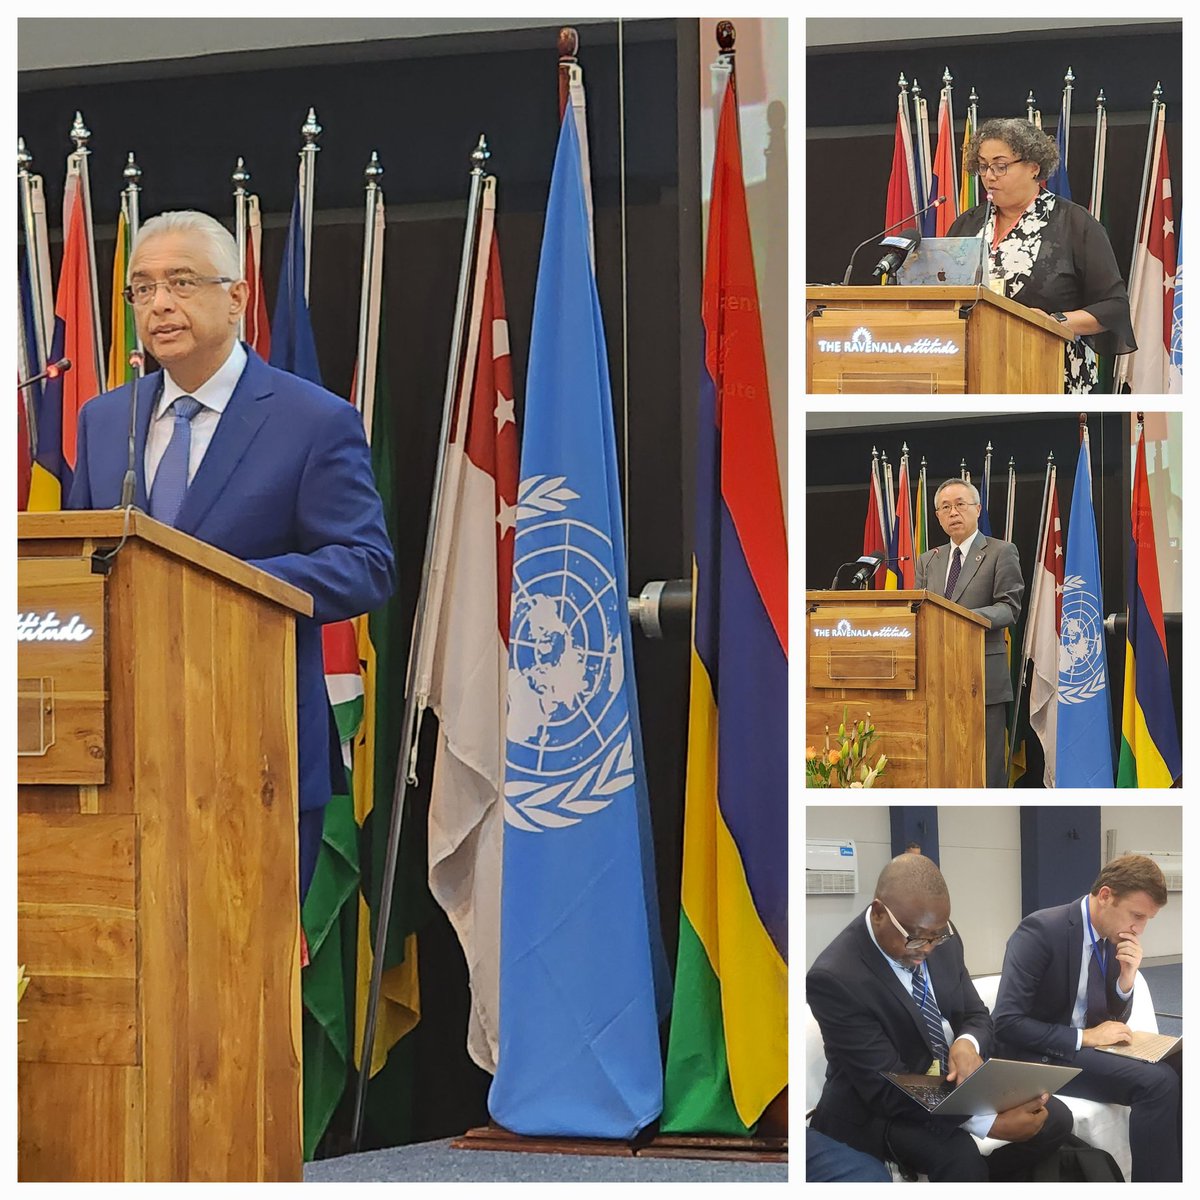 Pleased to join the @UN_Mauritius team this week for the #SIDS AIS regional conversation about progress on the #SAMOA pathway!